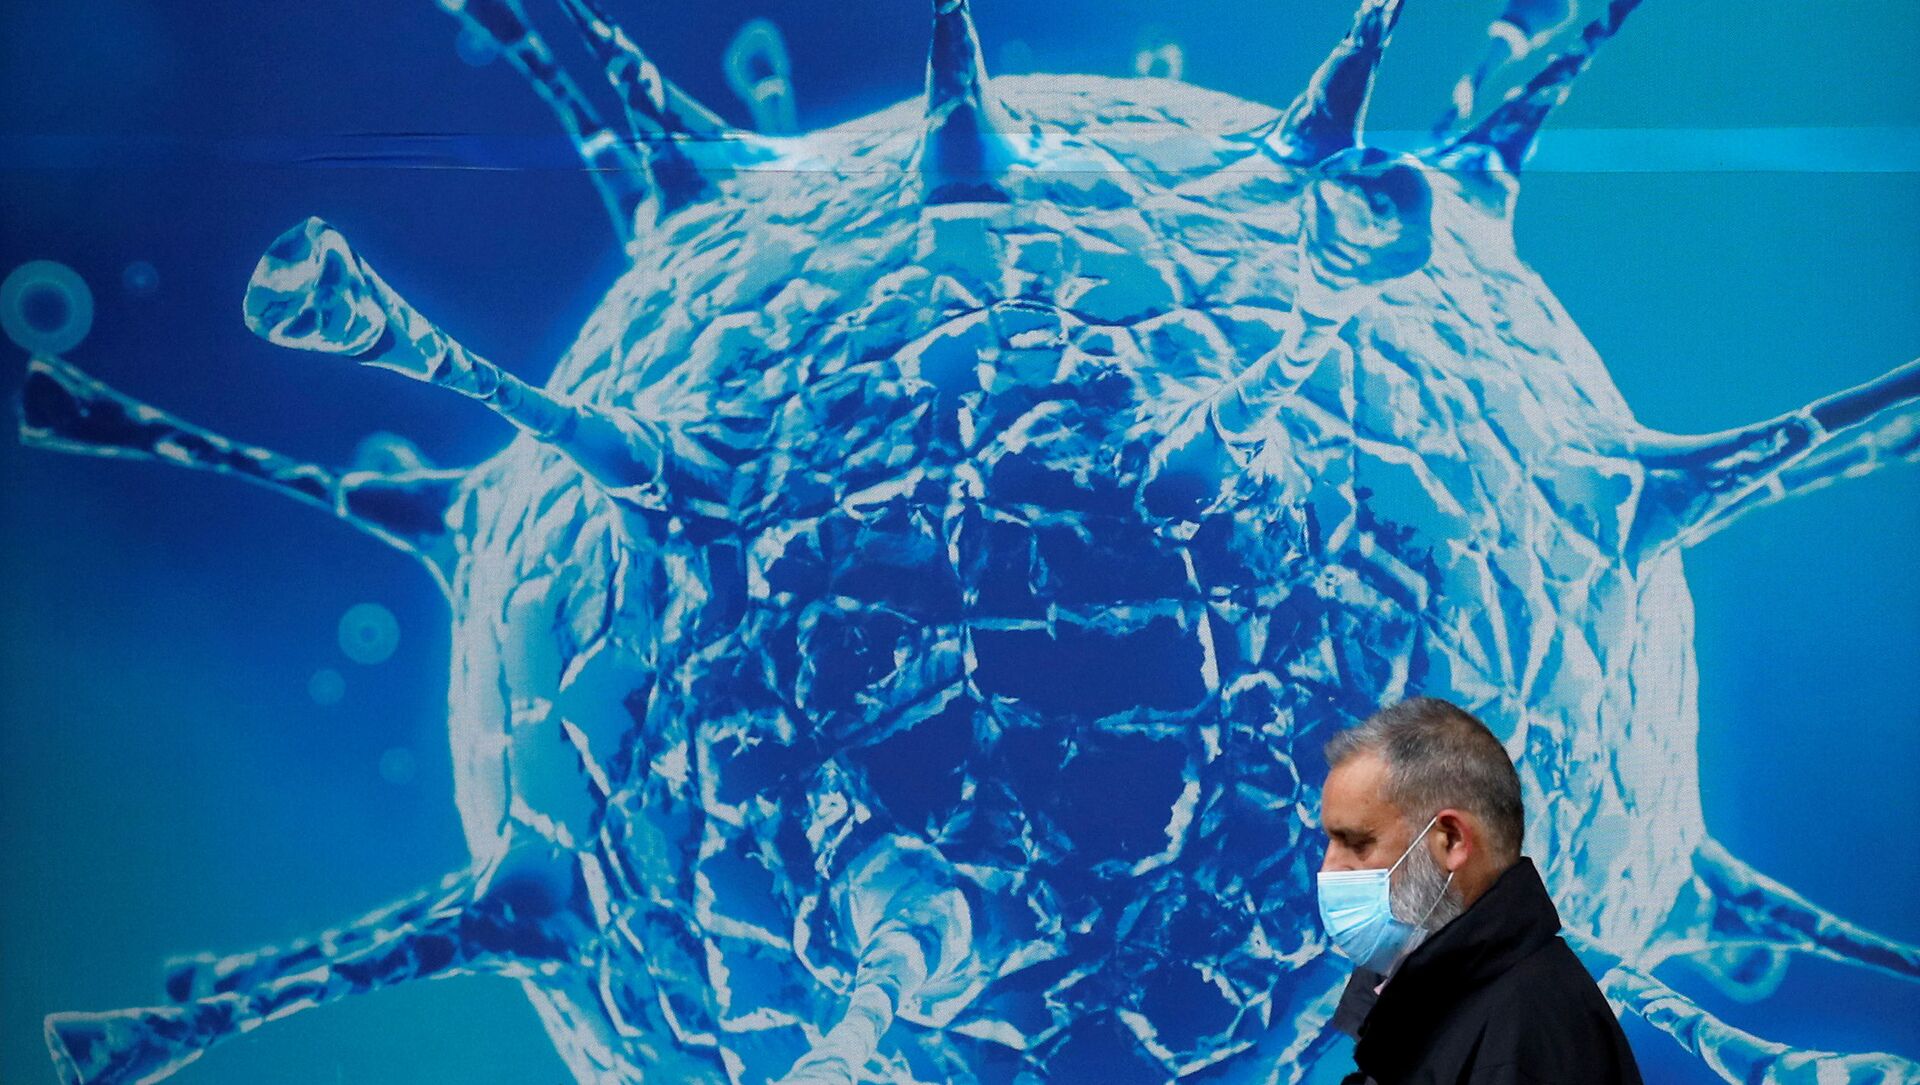 FILE PHOTO: A man wearing a protective face mask walks past an illustration of a virus outside a regional science centre amid the coronavirus disease (COVID-19) outbreak, in Oldham, Britain 3 August 2020. - Sputnik International, 1920, 11.02.2021